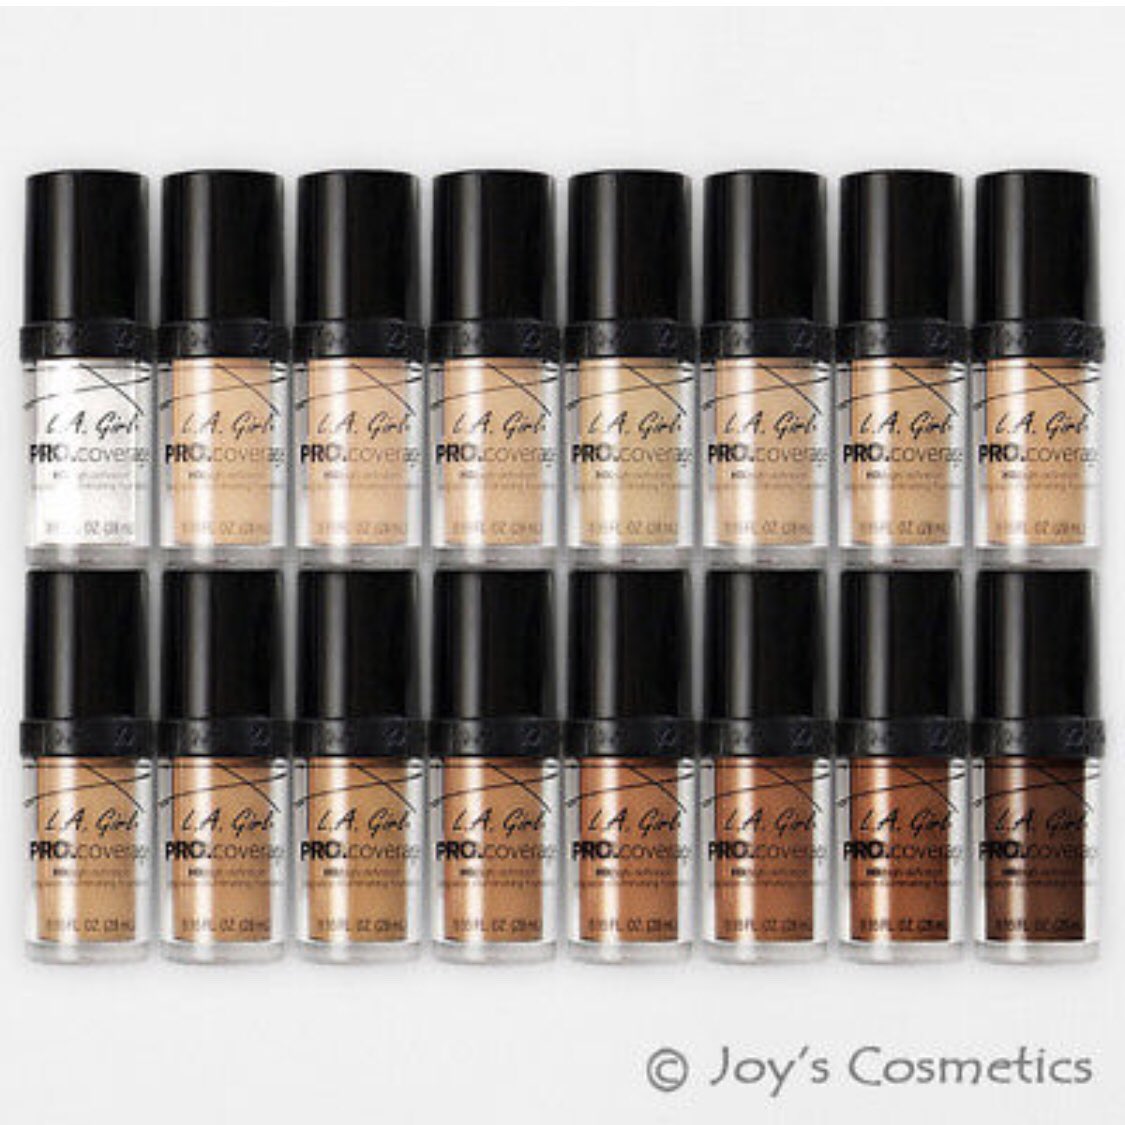 Y’all SLEEP on  @lagirlusa becuase the foundations, concealer and the mixers they have for their foundations are all bomb.The matte and illuminating mixed together is an ELITE combo, and the shade adjusters should be in every mua kit.Foundations + mixers: $8.99Concealer: $3.99